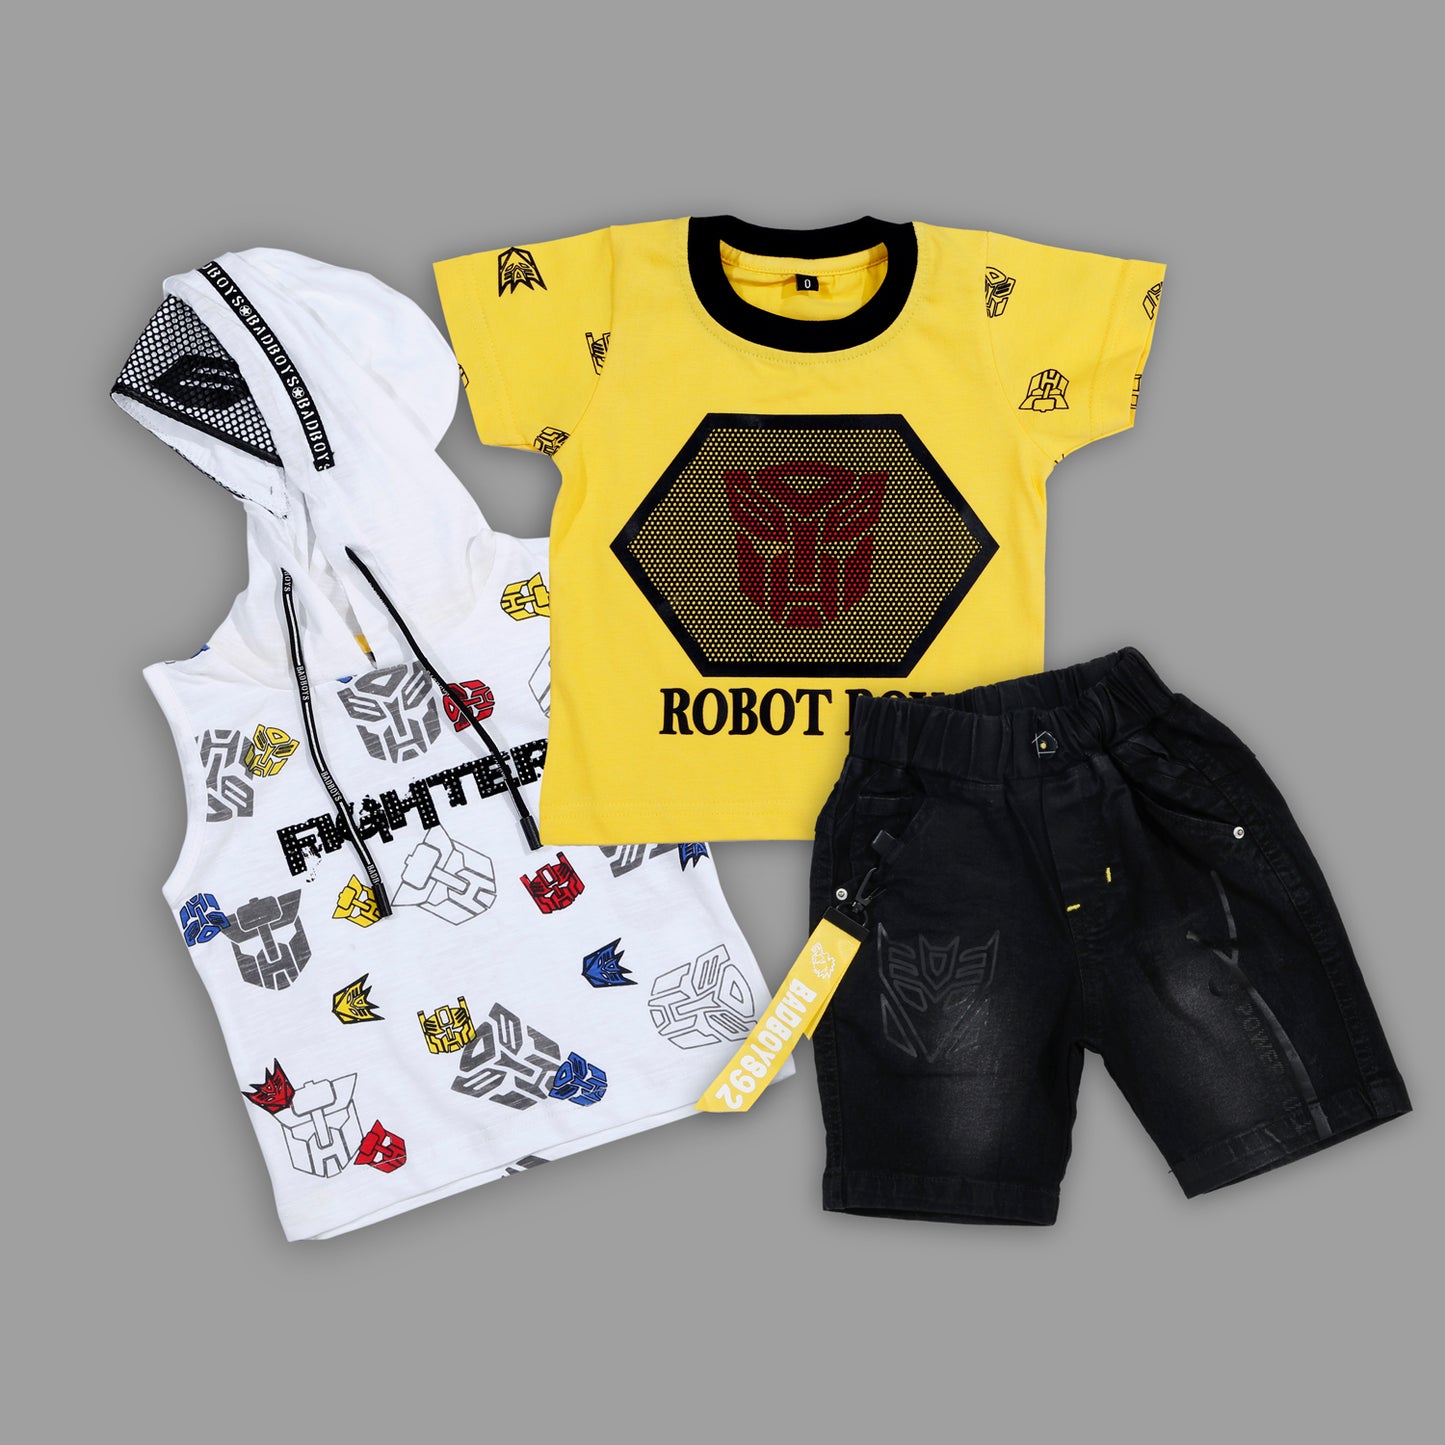 Bad Boys Stylish Outfit with Cotton T-shirt, Shorts and Hoodie - mashup boys